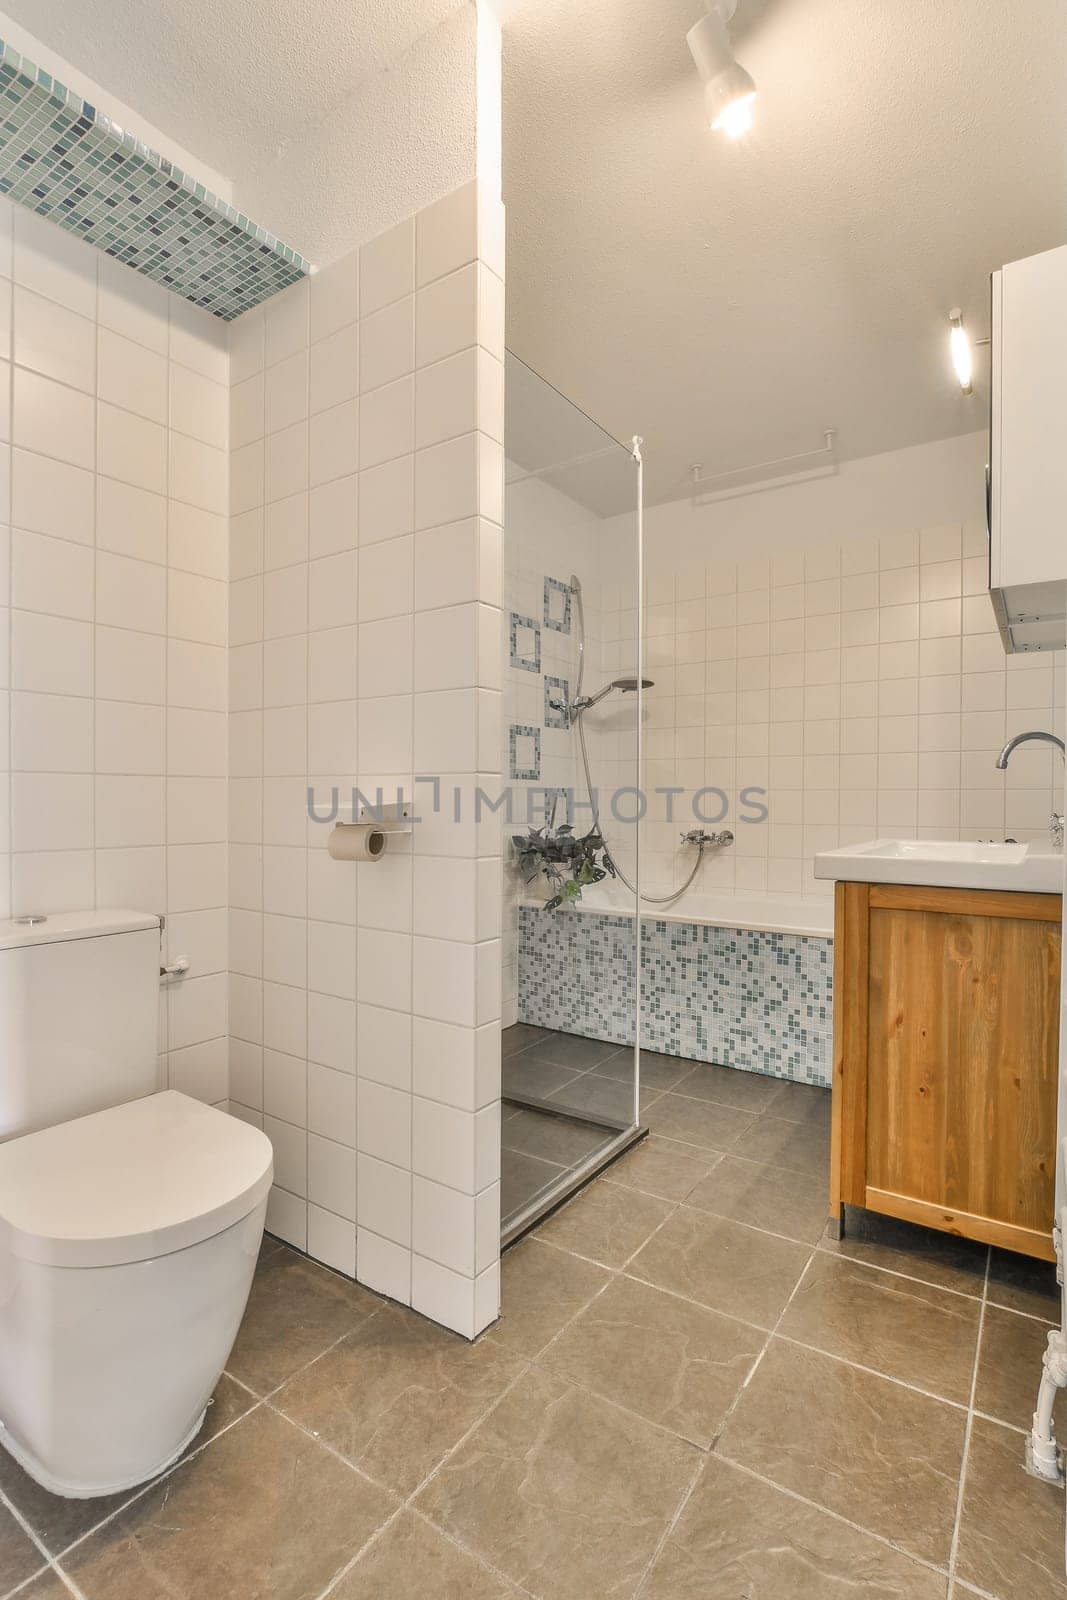 a bathroom with tile flooring and white tiles on the walls, along with a wooden vanity in the corner